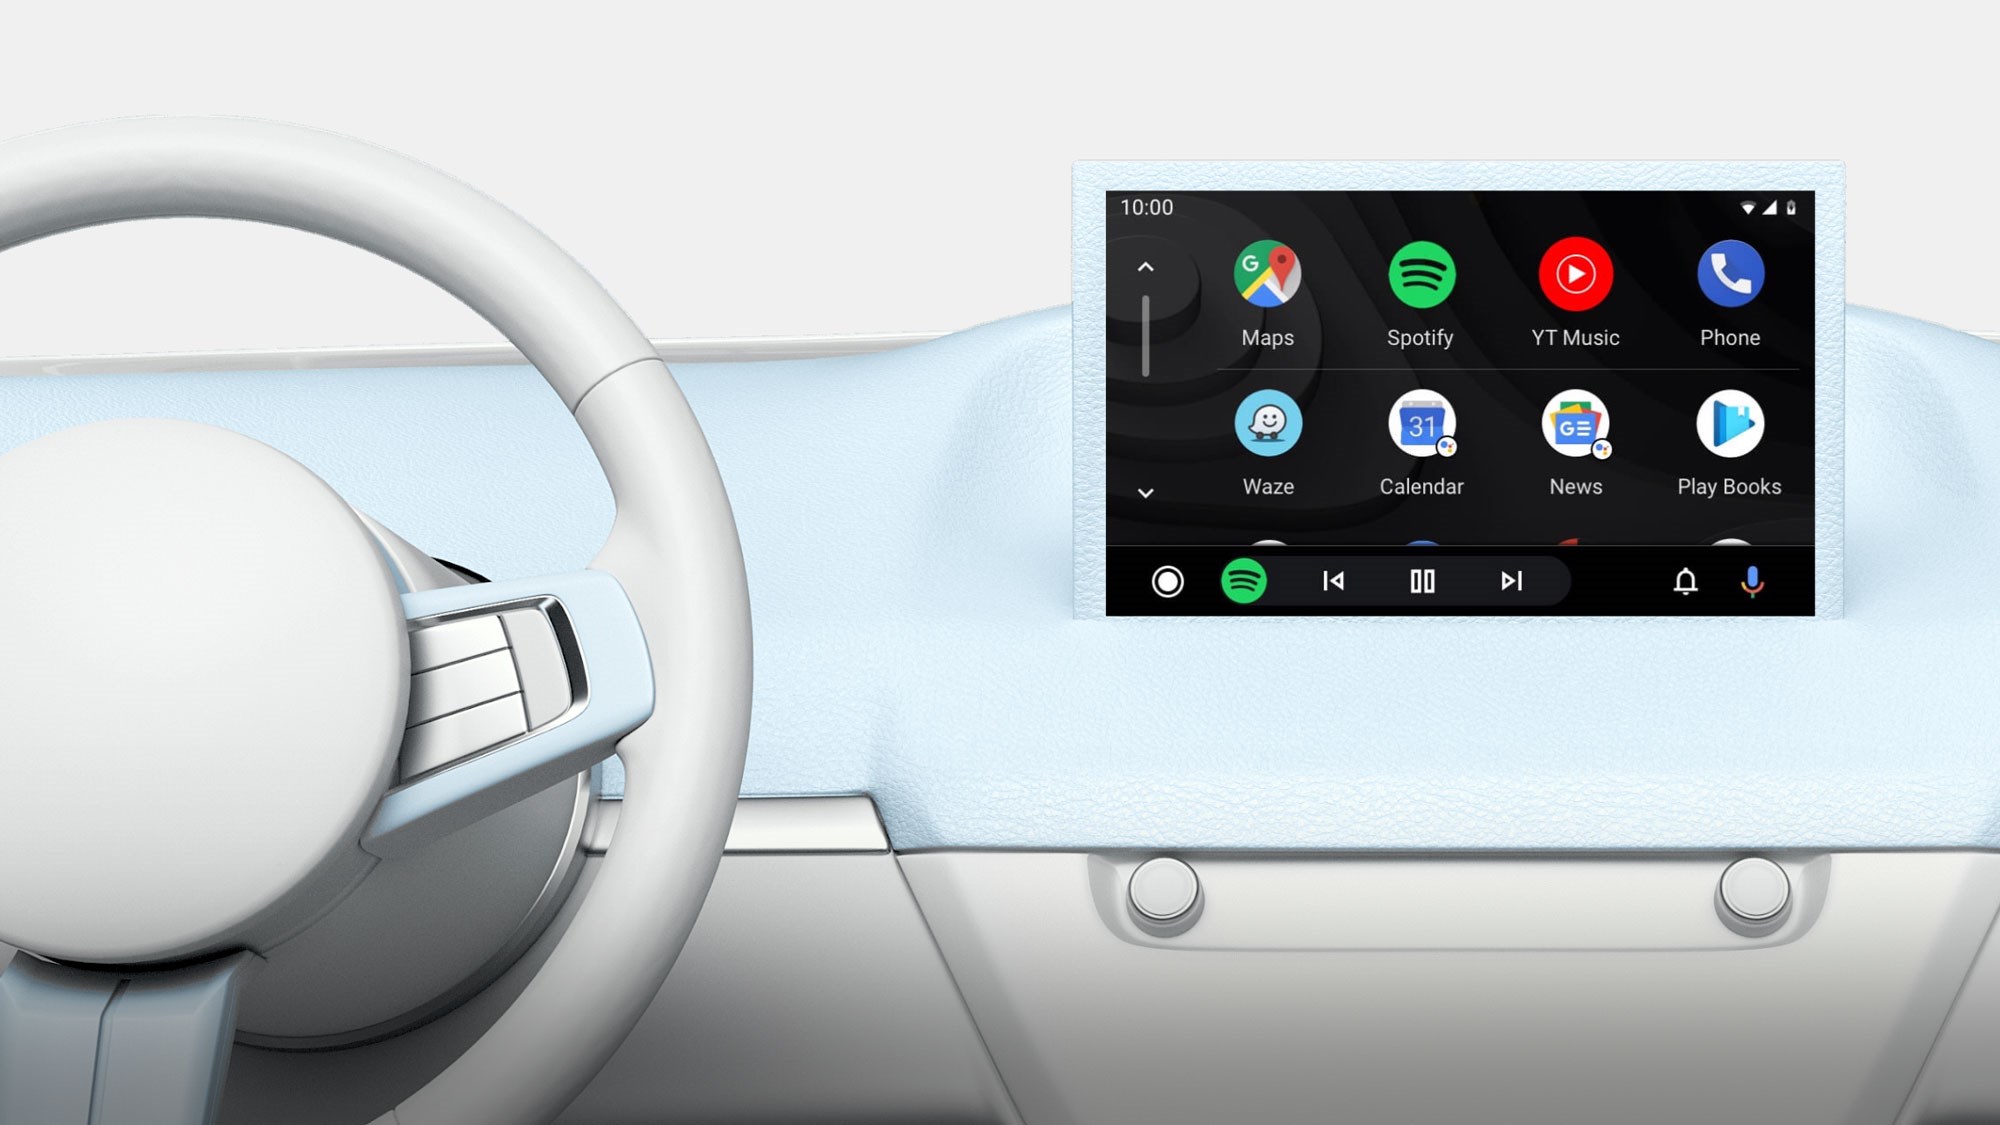 Android Auto 10 review: Google's latest update tested